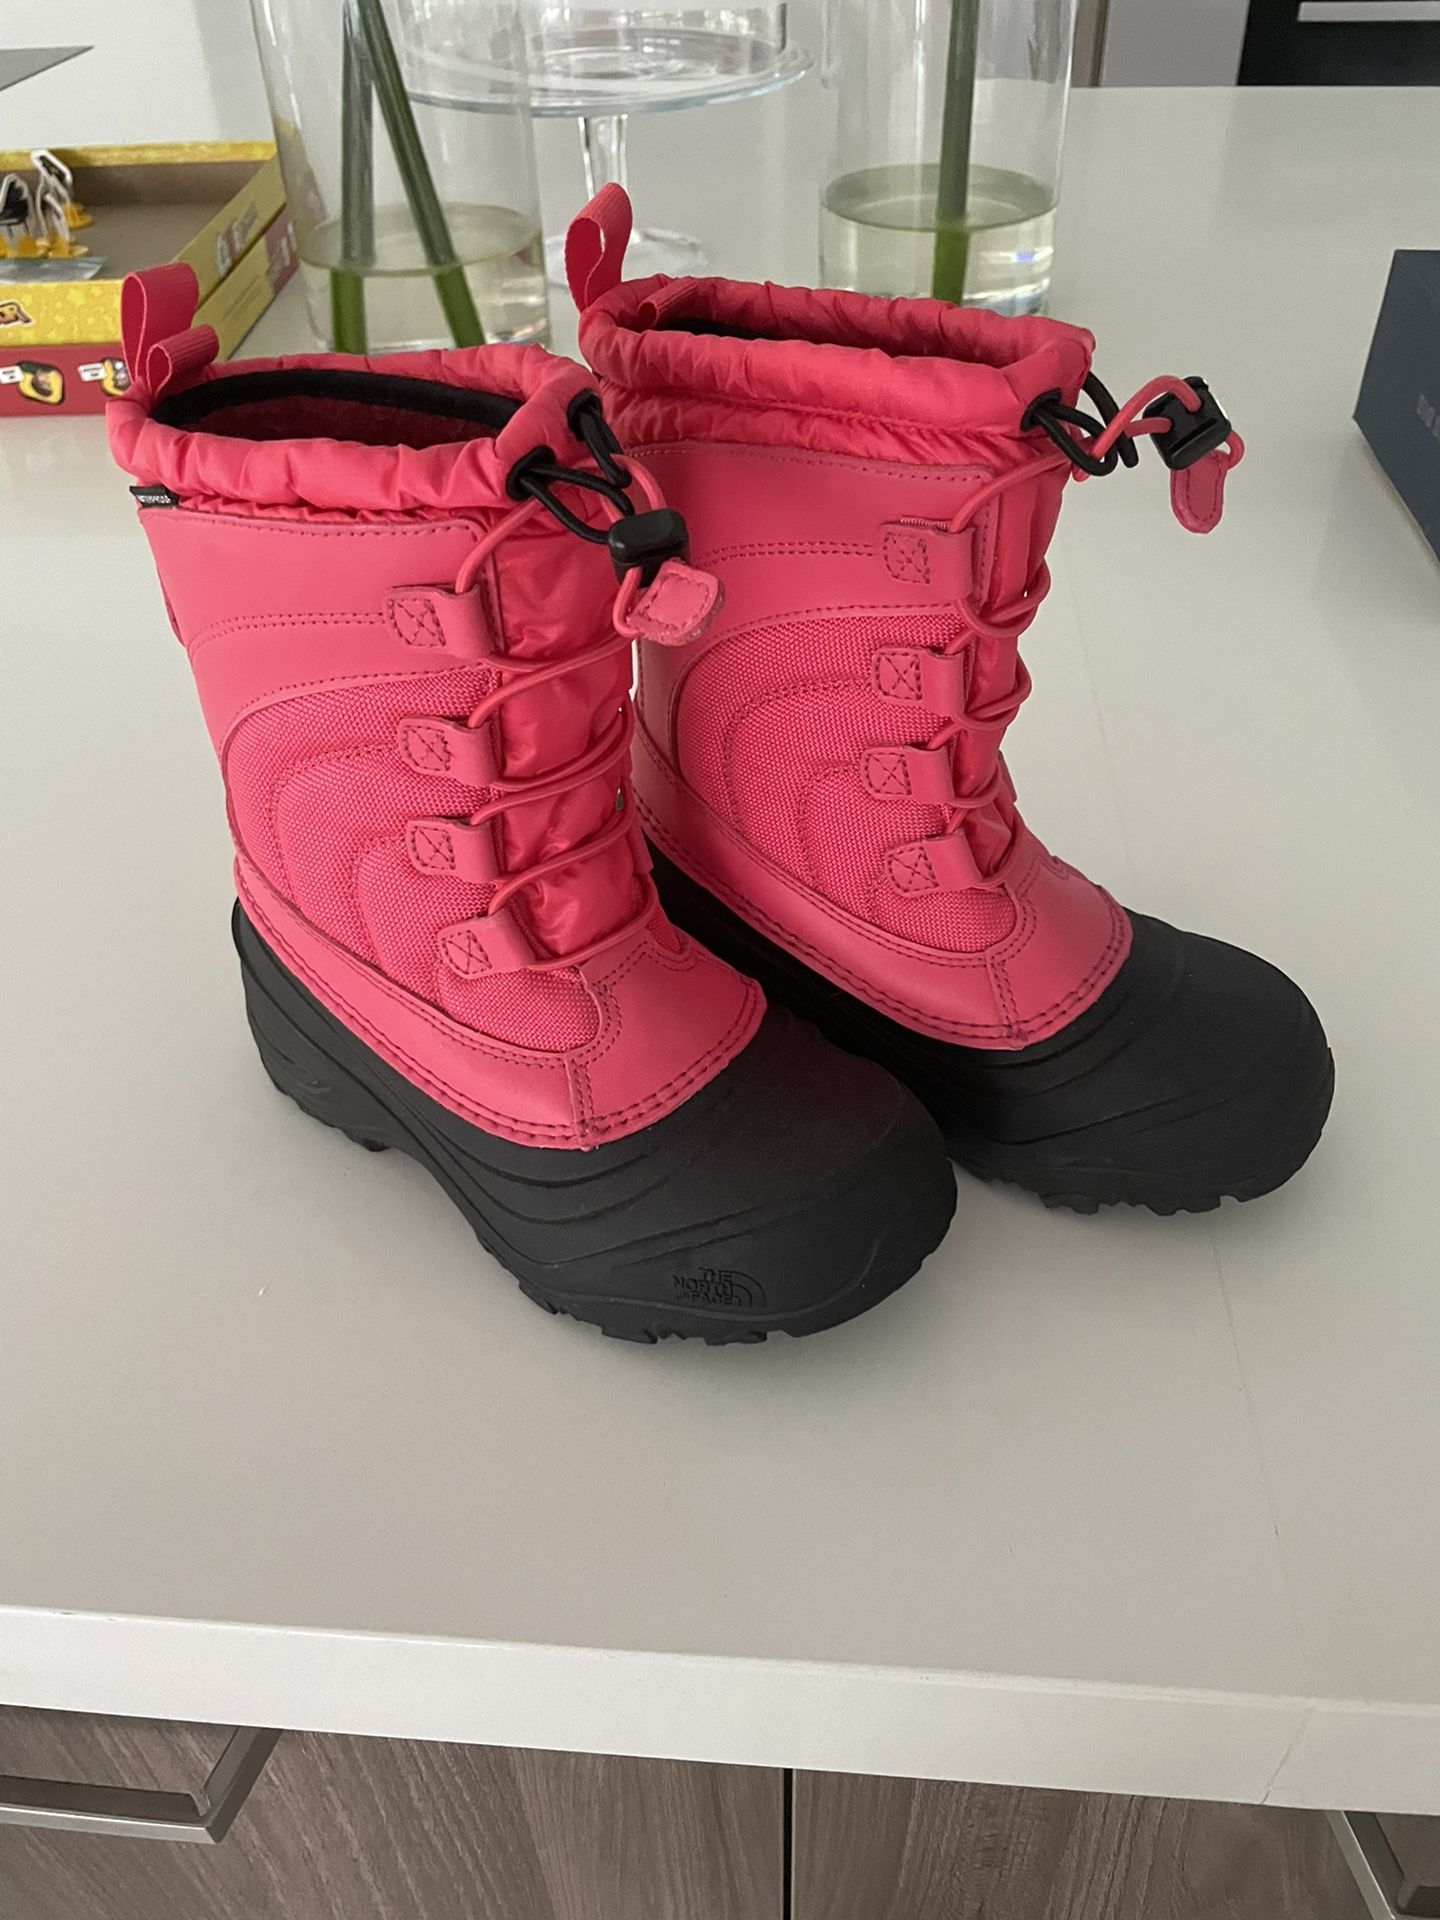 Girls North Face Boots Size 2 